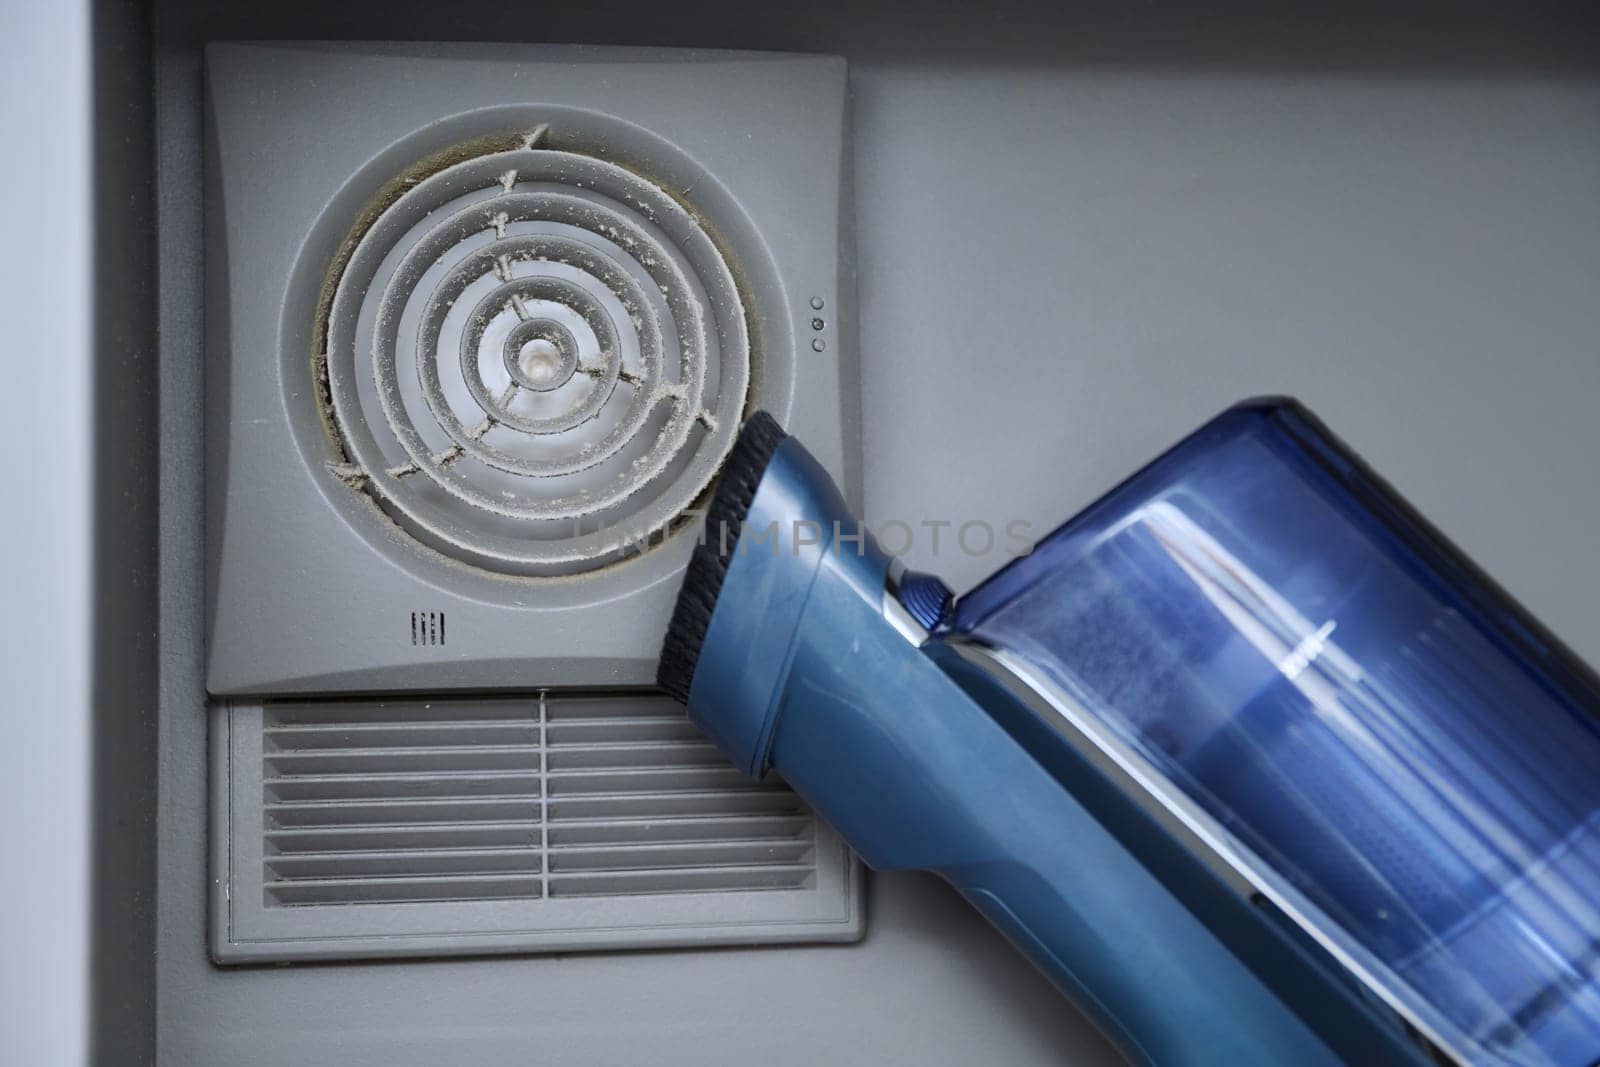 Cleaning wall-mounted dusty hood ventilation grill in bathroom with vacuum cleaner. Housekeeping, housework, housecleaning, cleaning service concept